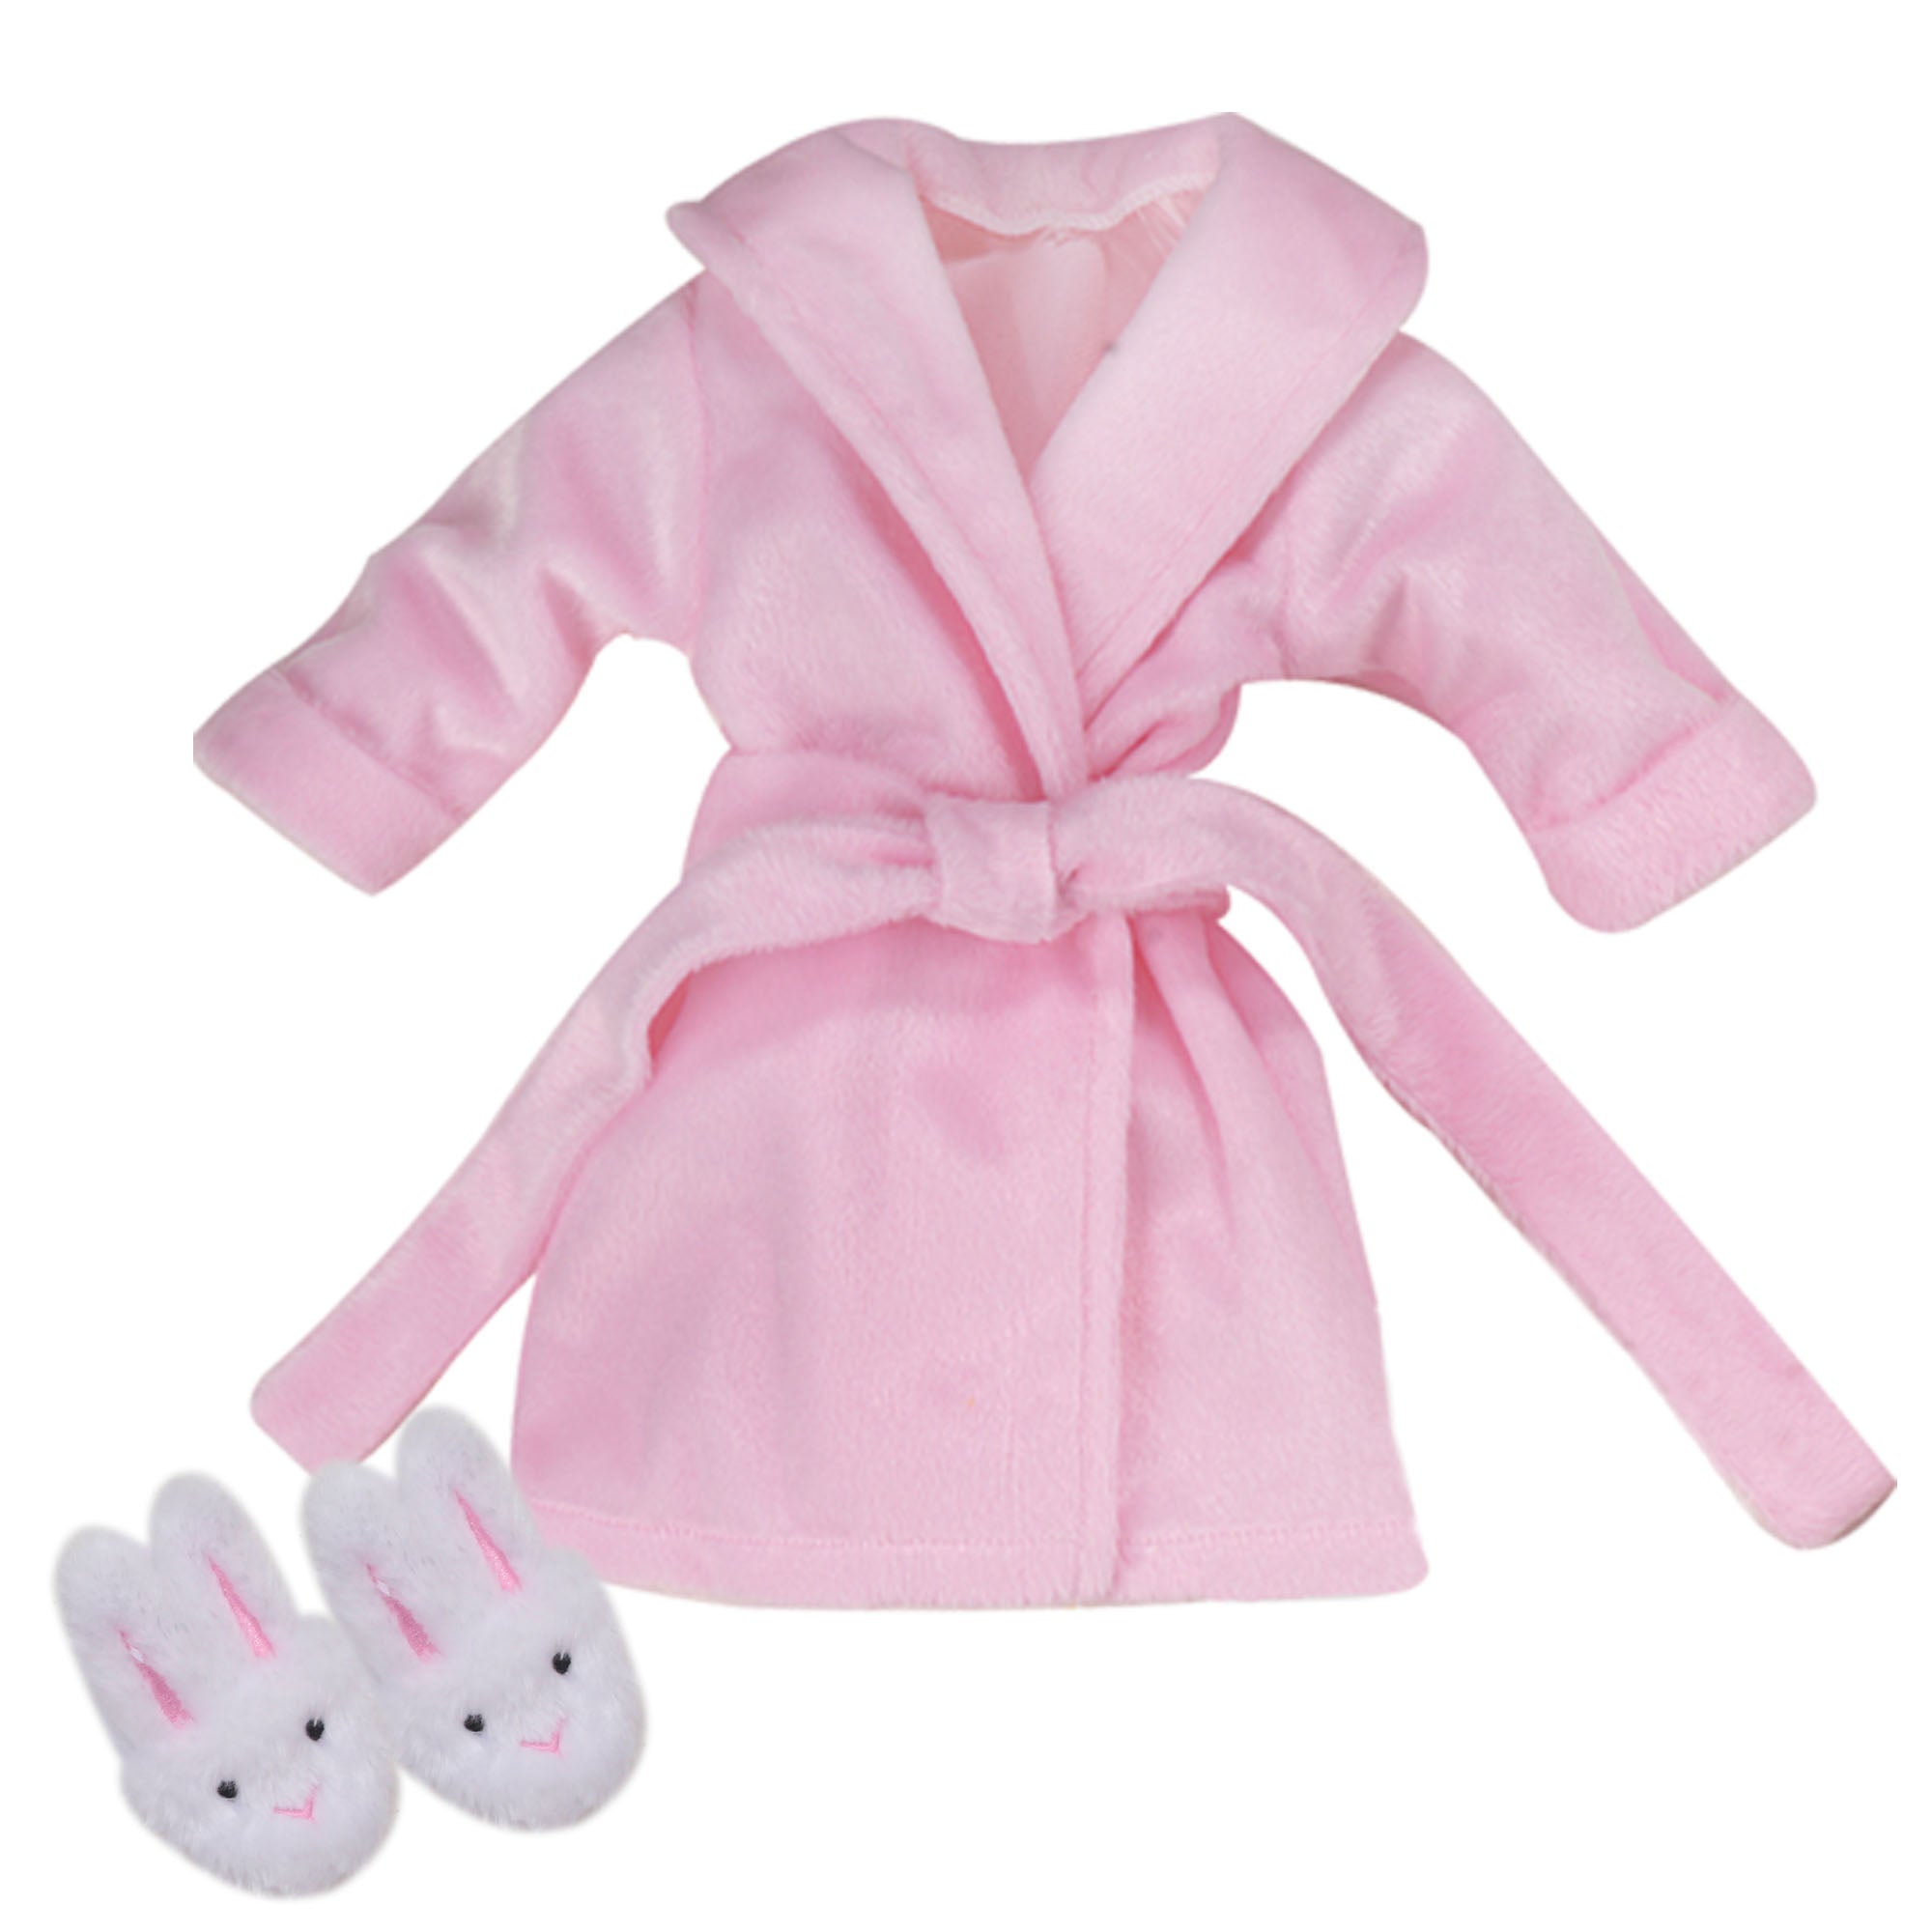 Sophia's Soft Bathrobe and Faux faux fur Bunny Slippers with Embroidery for 18" Dolls, Pink/White